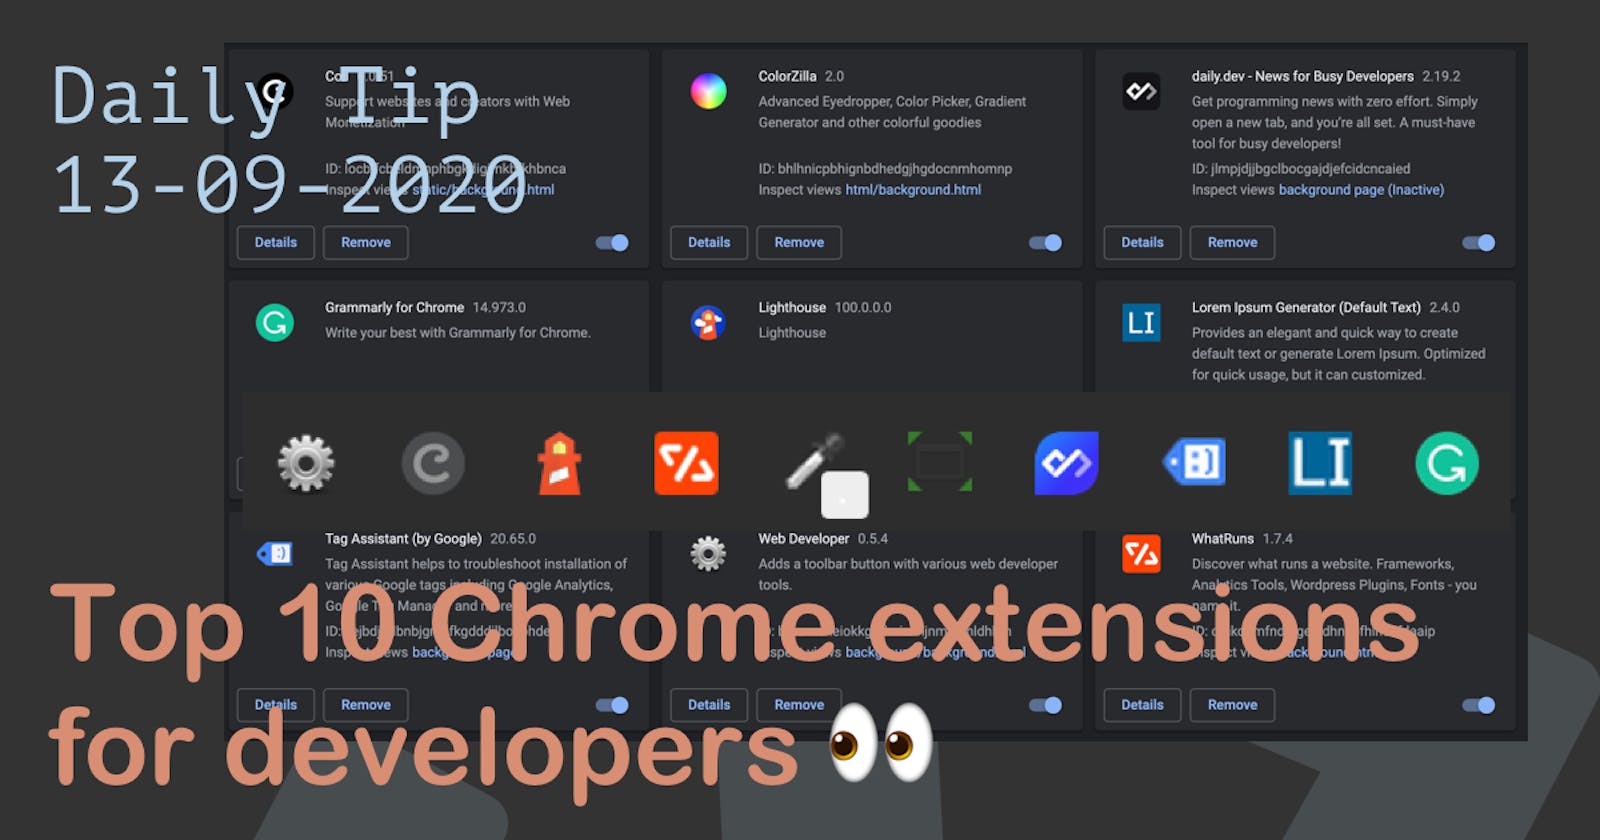 Top 10 Chrome extensions for developers 👀